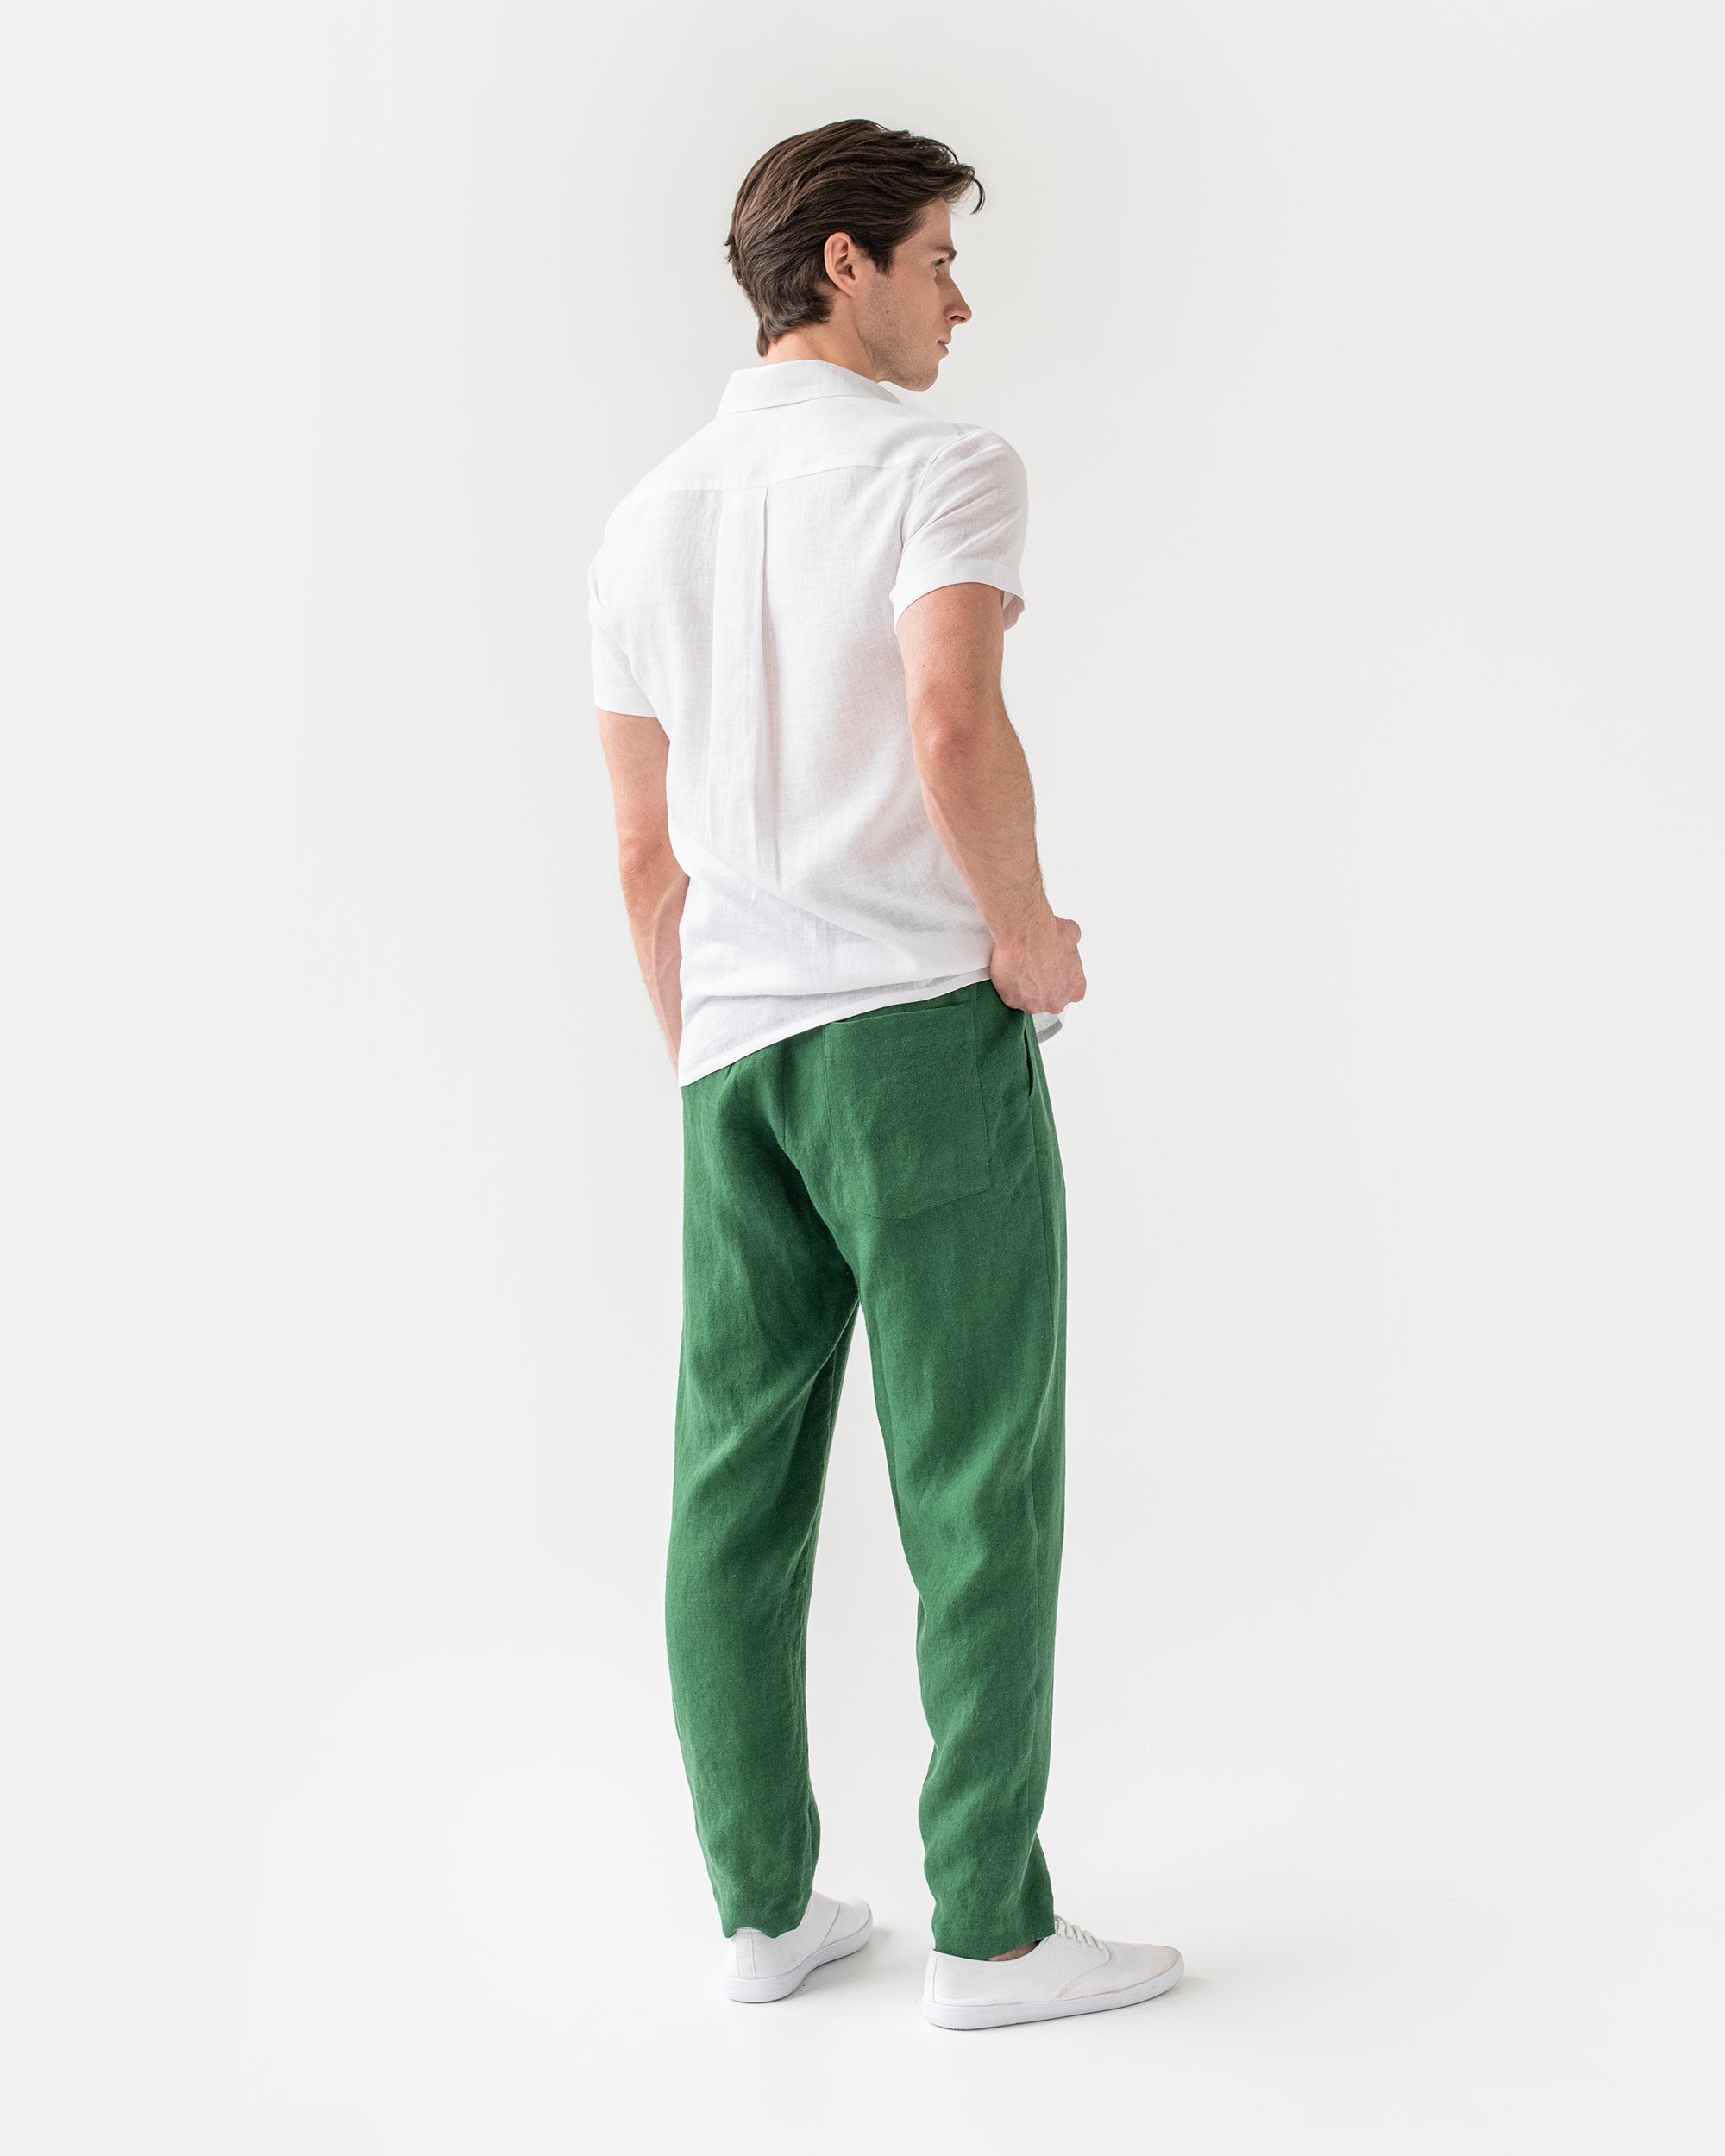 Buy Casual Loose Linen Trousers For Men at LeStyleParfait  Mens linen pants  Linen pants style Linen pants